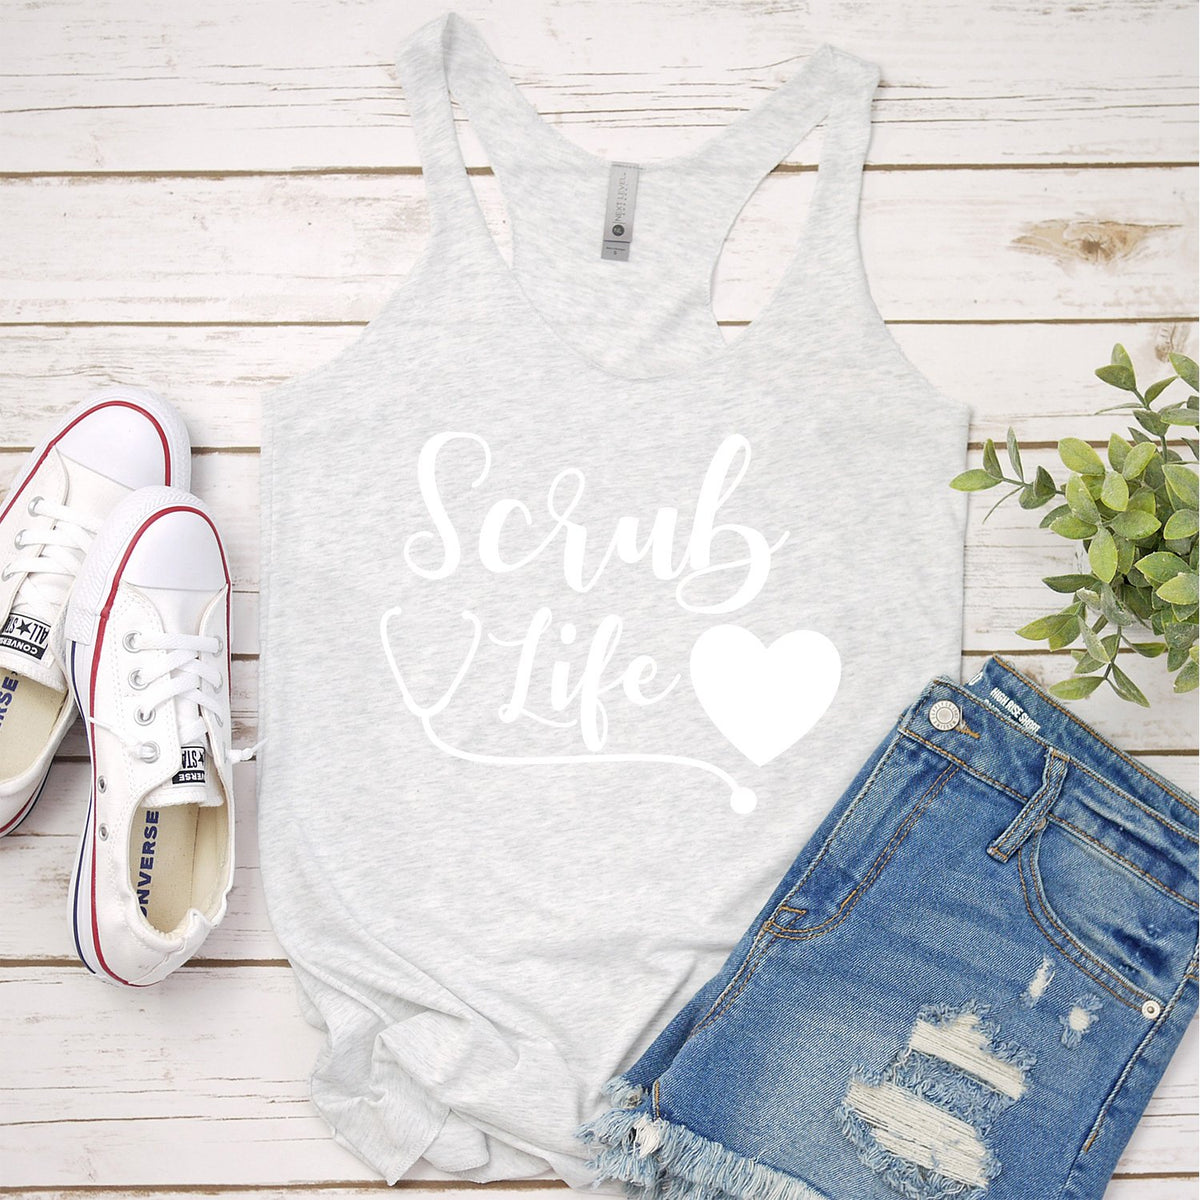 Scrub Life with Stethoscope and Heart - Tank Top Racerback